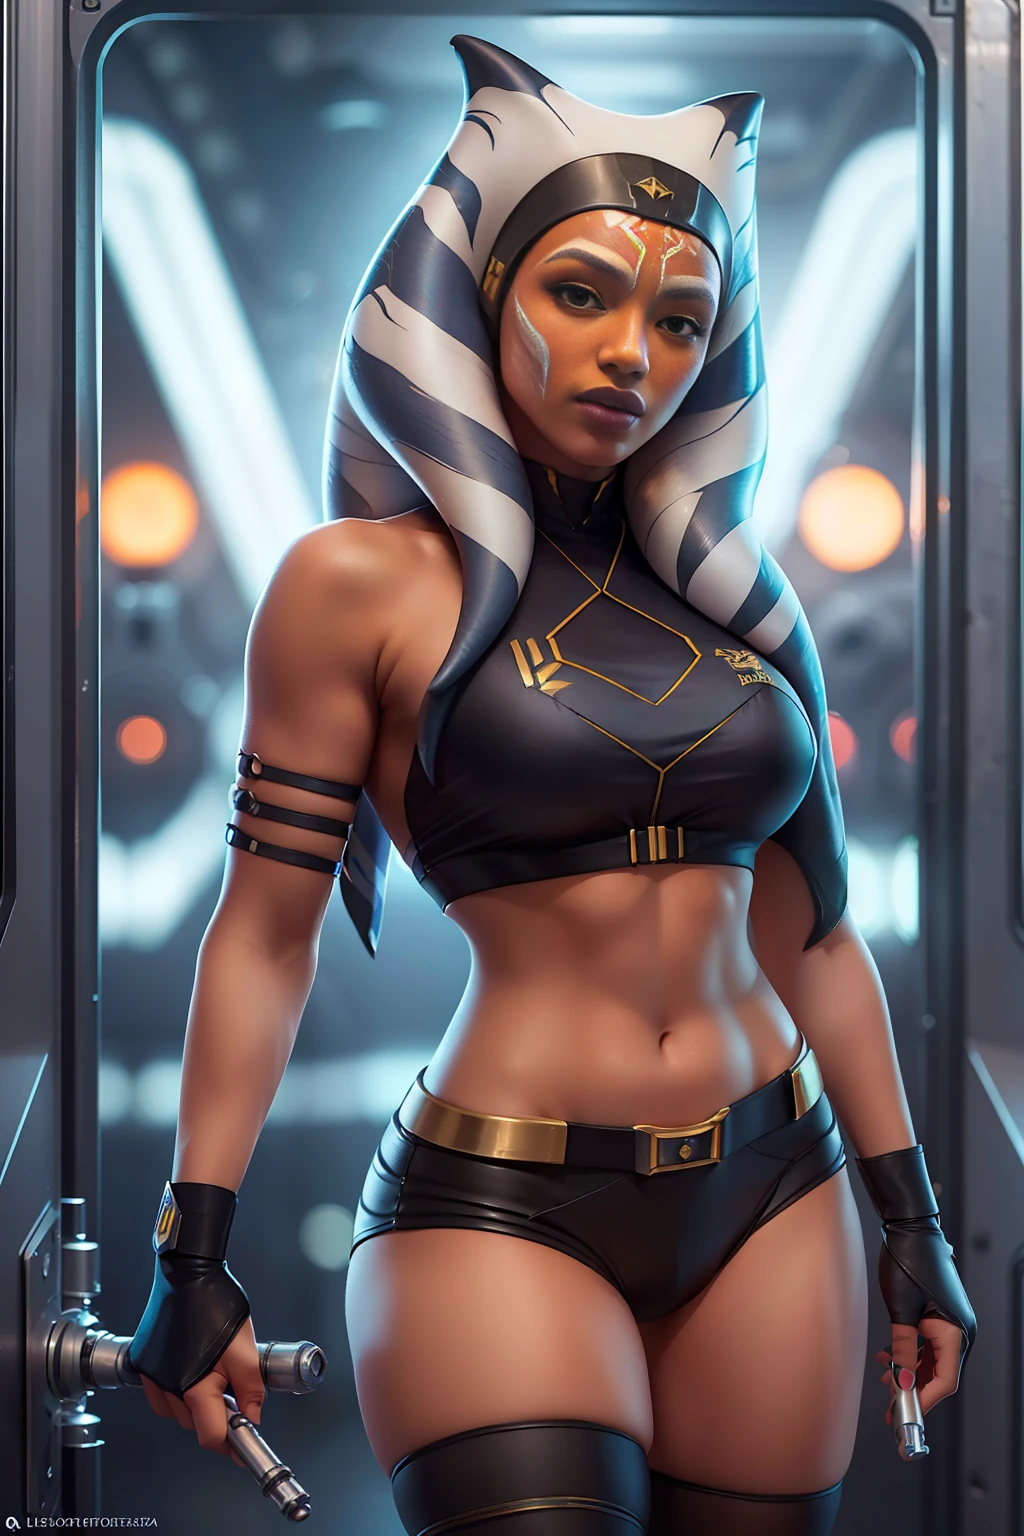 Ahsoka Tano, (fotorrealisitic, Highresolution: 1.4), ((Swollen Eyes)), gazing at viewer, , fully body (8K, Foto RAW, best qualityer, Masterpiece artwork: 1.2), (realisitic, realisitic: 1.37), (sharp-focus: 1.2), Professional  lighting, photon mapping, radiosity, physics-based render, (orange fur: 1.2), (breasts small: 1.2), gazing at viewer, portraite, blue colored eyes, (background inside spacecraft: 1.4),  soli, upperbody, realisitic, (Masterpiece artwork: 1.4), (best qualityer: 1.4), (shining skin), serious (Scrawny, cloused mouth, focused: 1.3), (standing full-length: 1.1), medium bust, struggling pose,